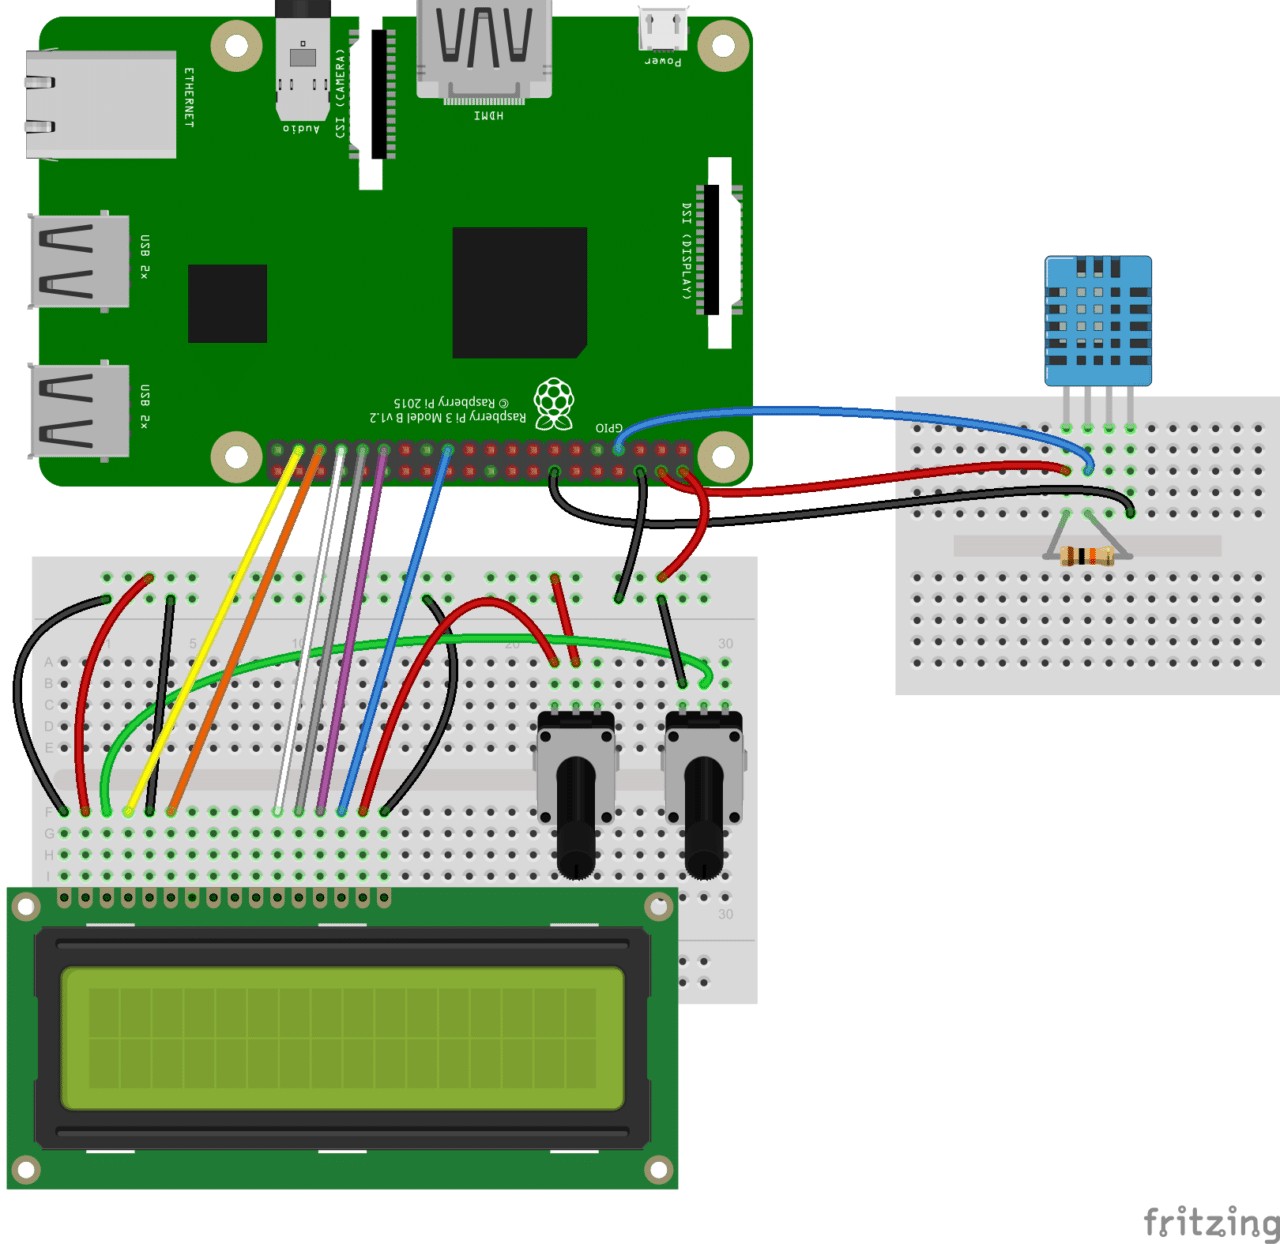 How To Set Up The DHT11 Humidity Sensor Raspberry Pi Amazing Wiring Diagram